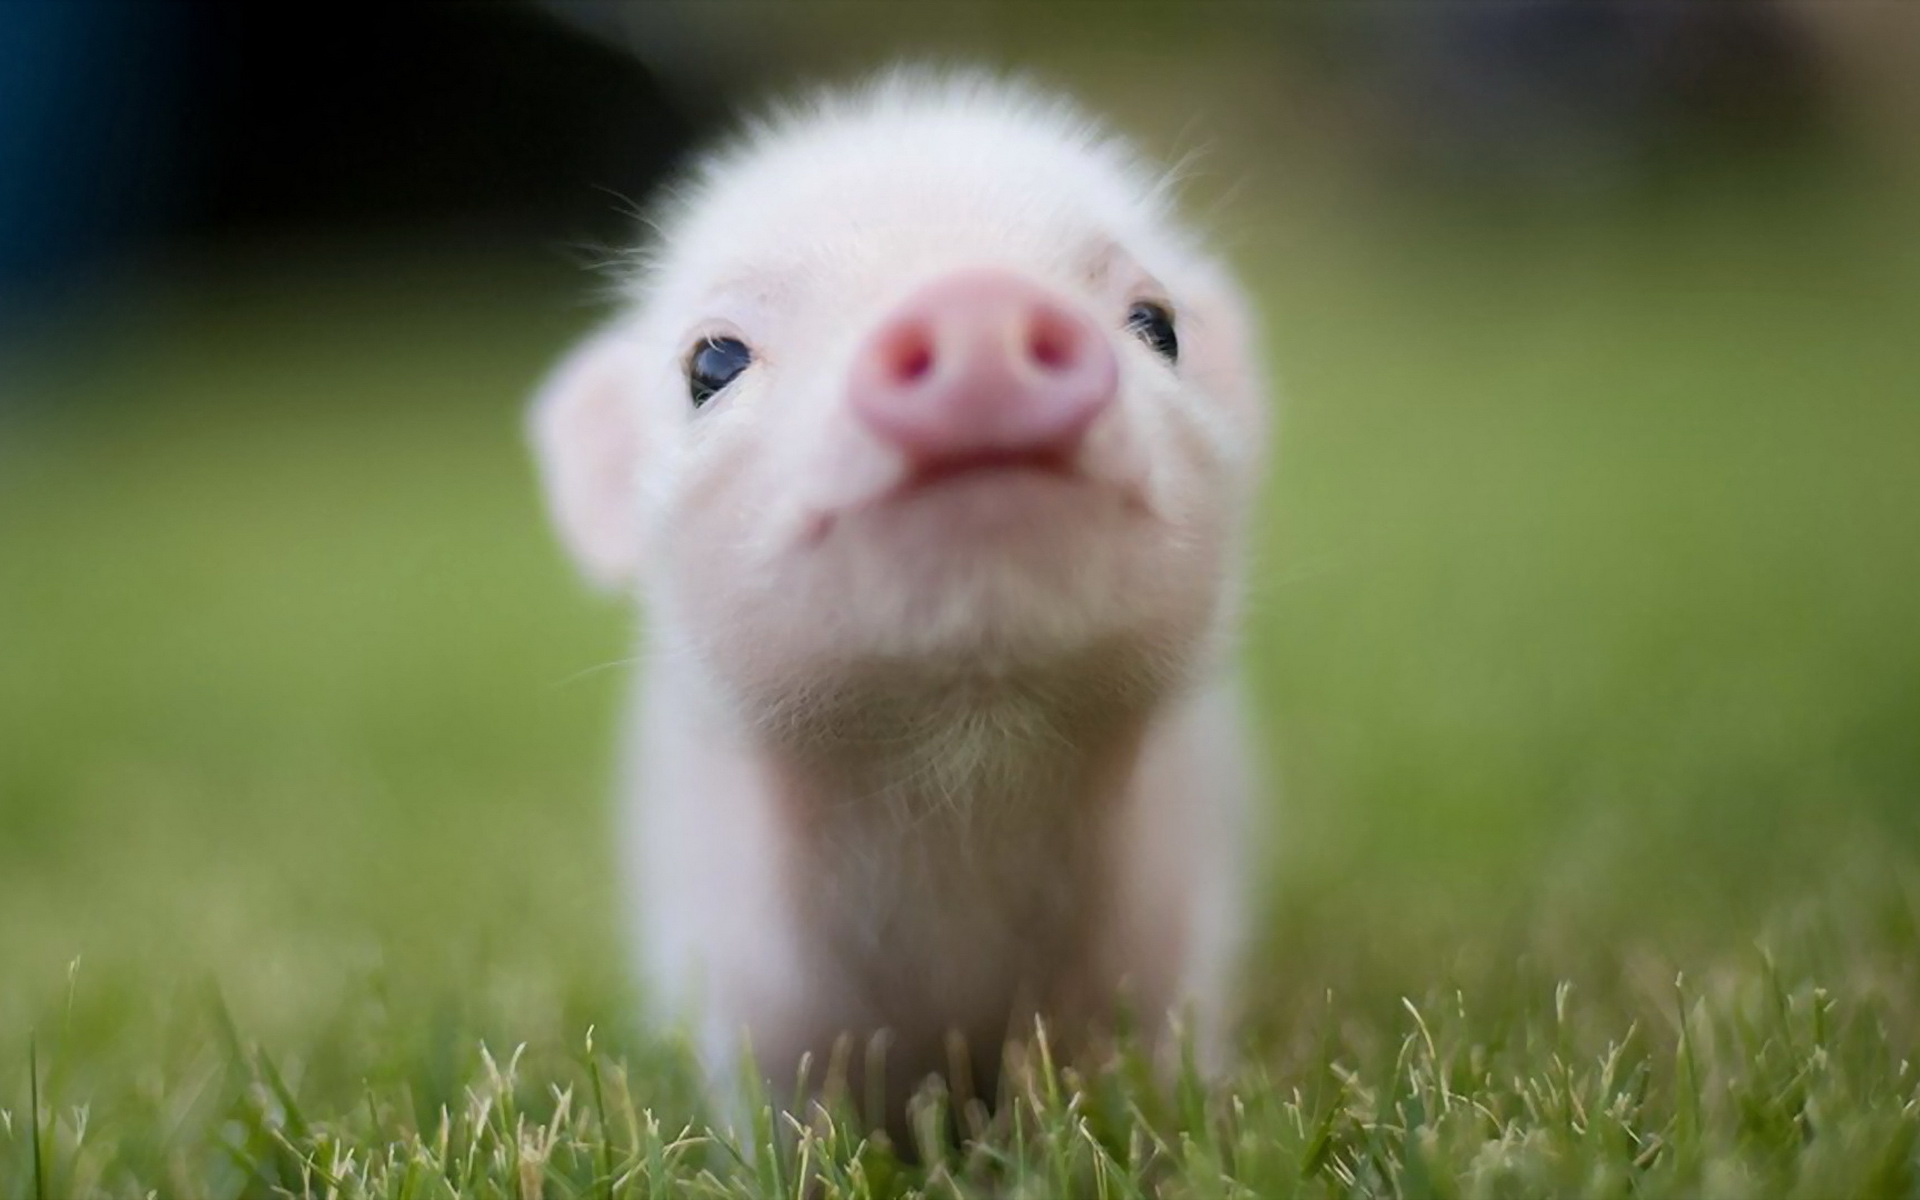 Little Pig Wallpaper And Image Pictures